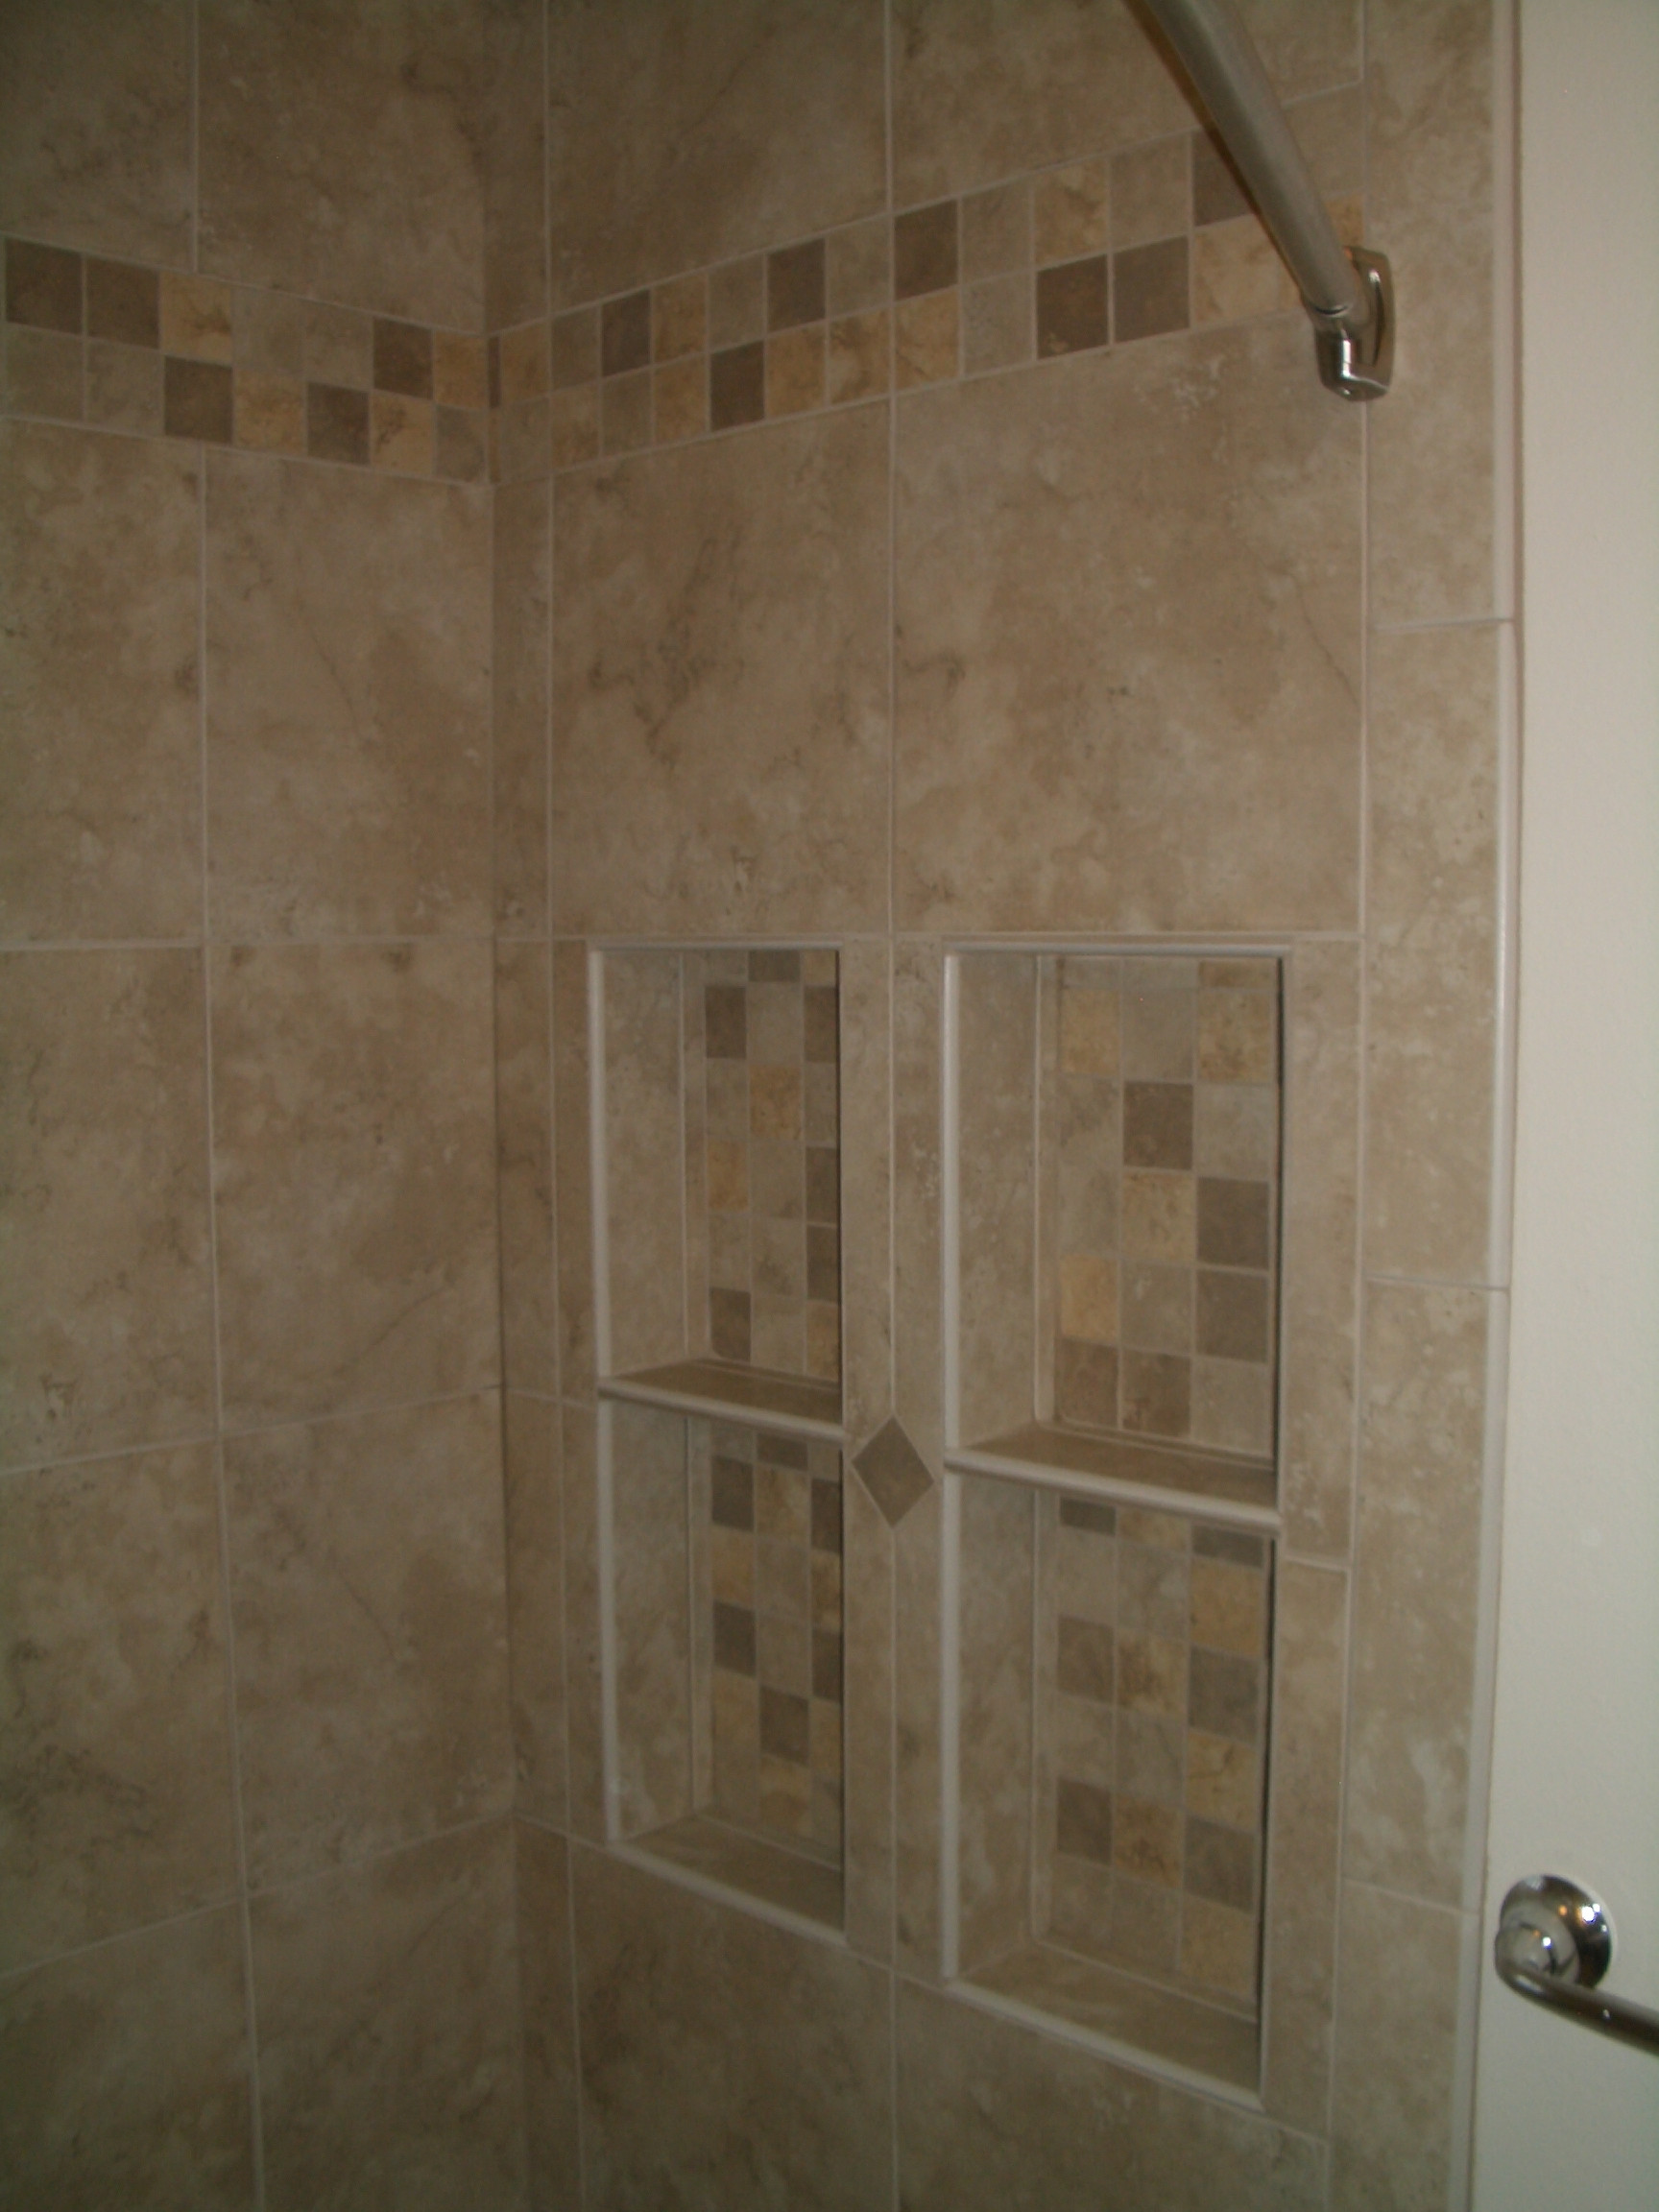 Tile Over Drywall Bathroom Luxury Drywall to Backerboard Transition In Tiled Showers